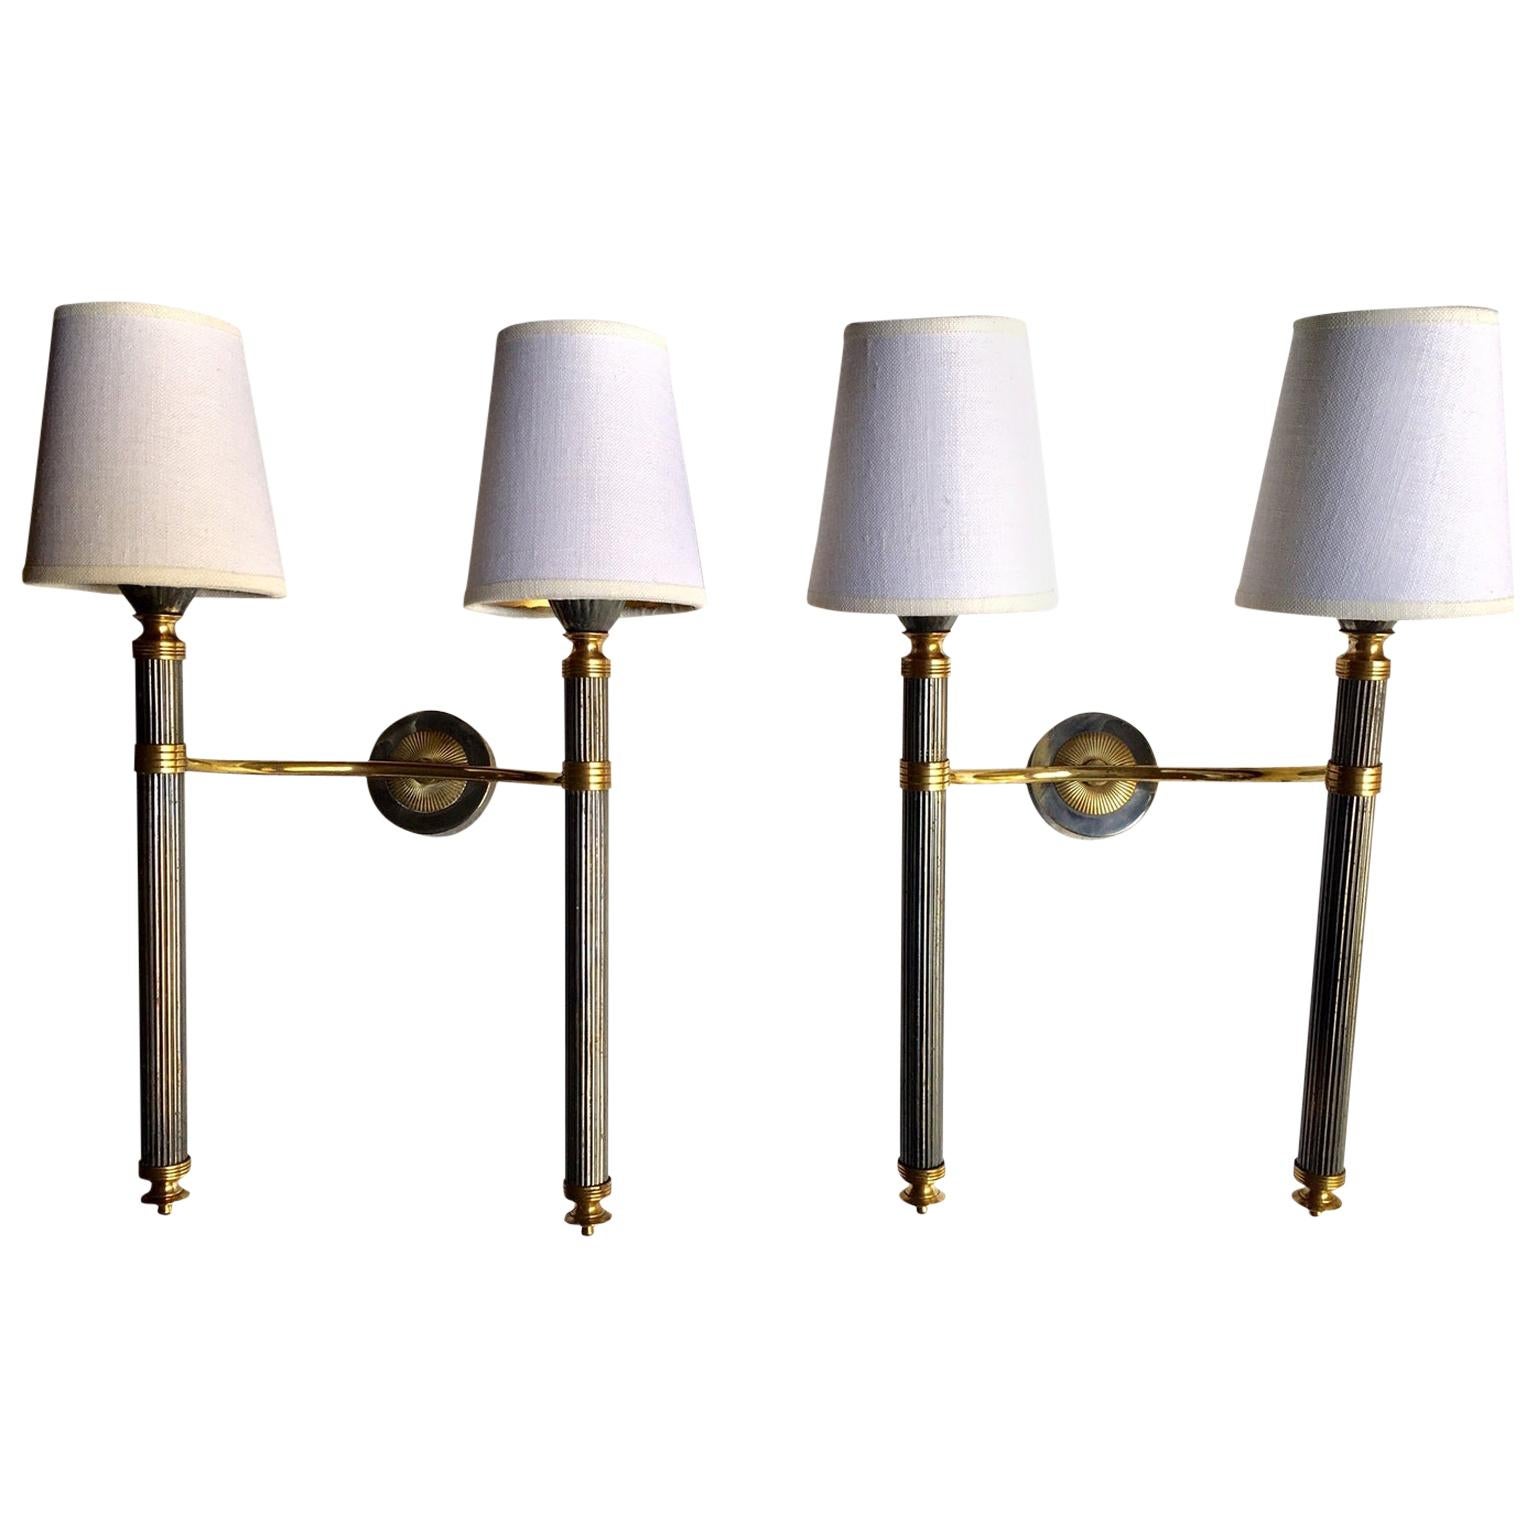 Pair of Midcentury Patinated Brass Doble Wall Sconces by Lunel